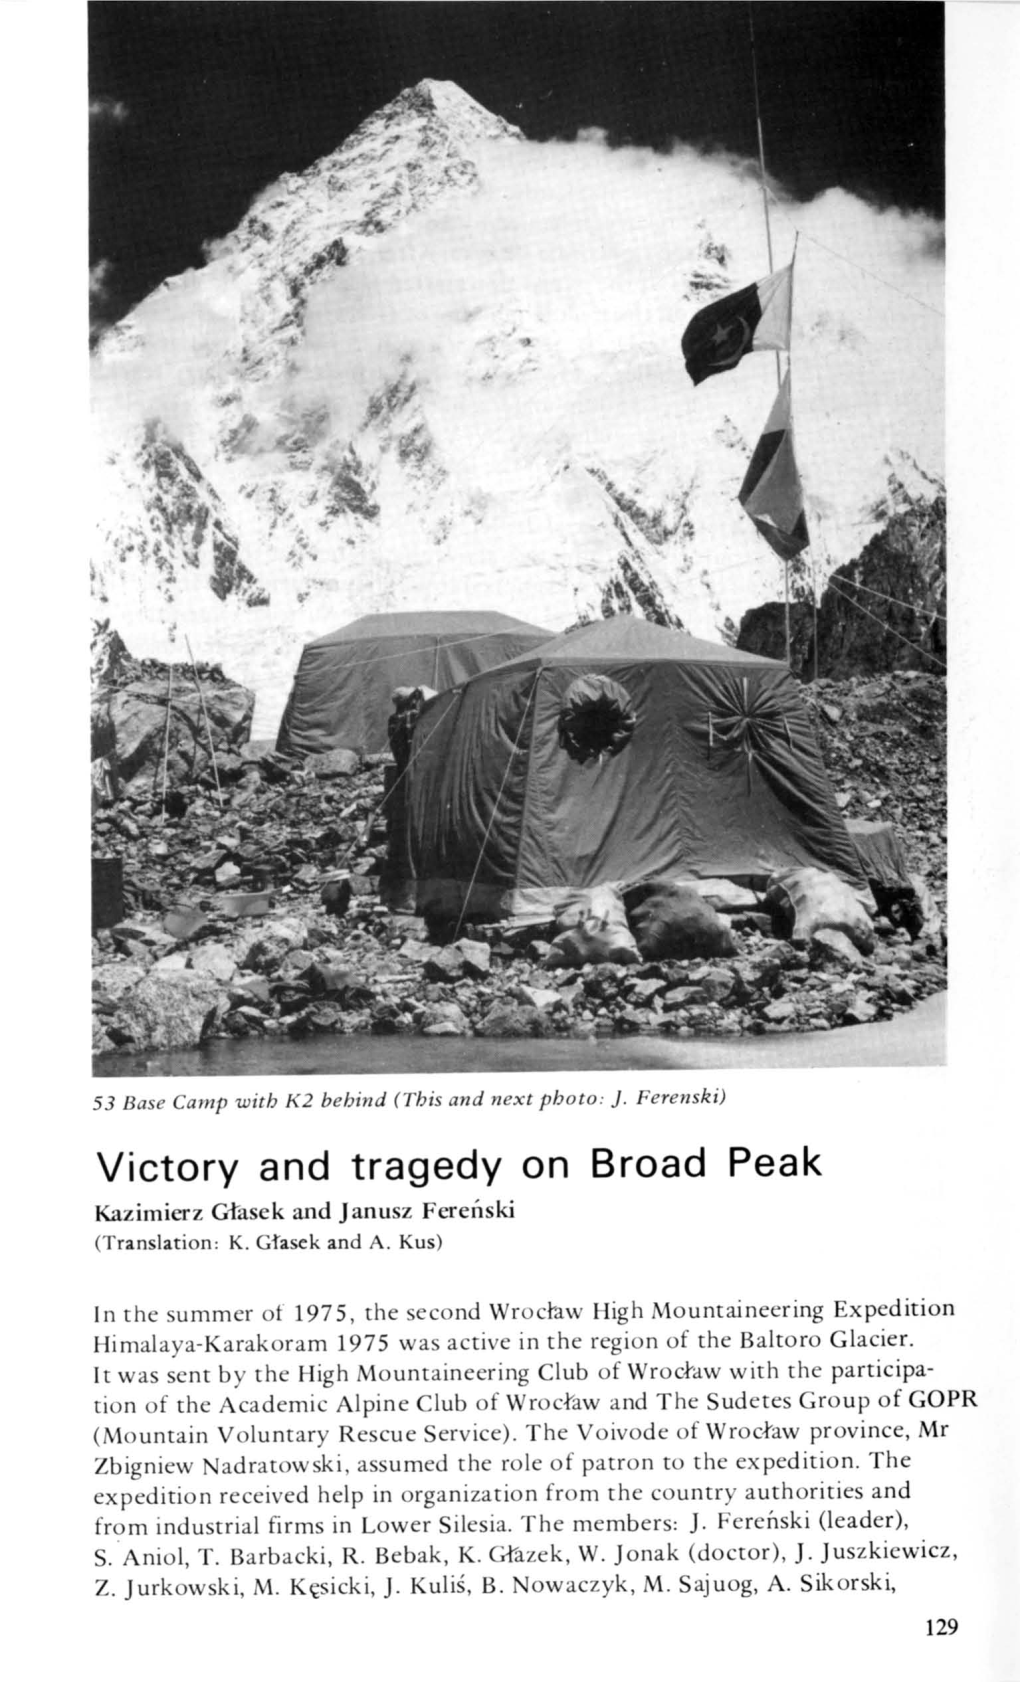 Victory and Tragedy on Broad Peak K. Glasek and J